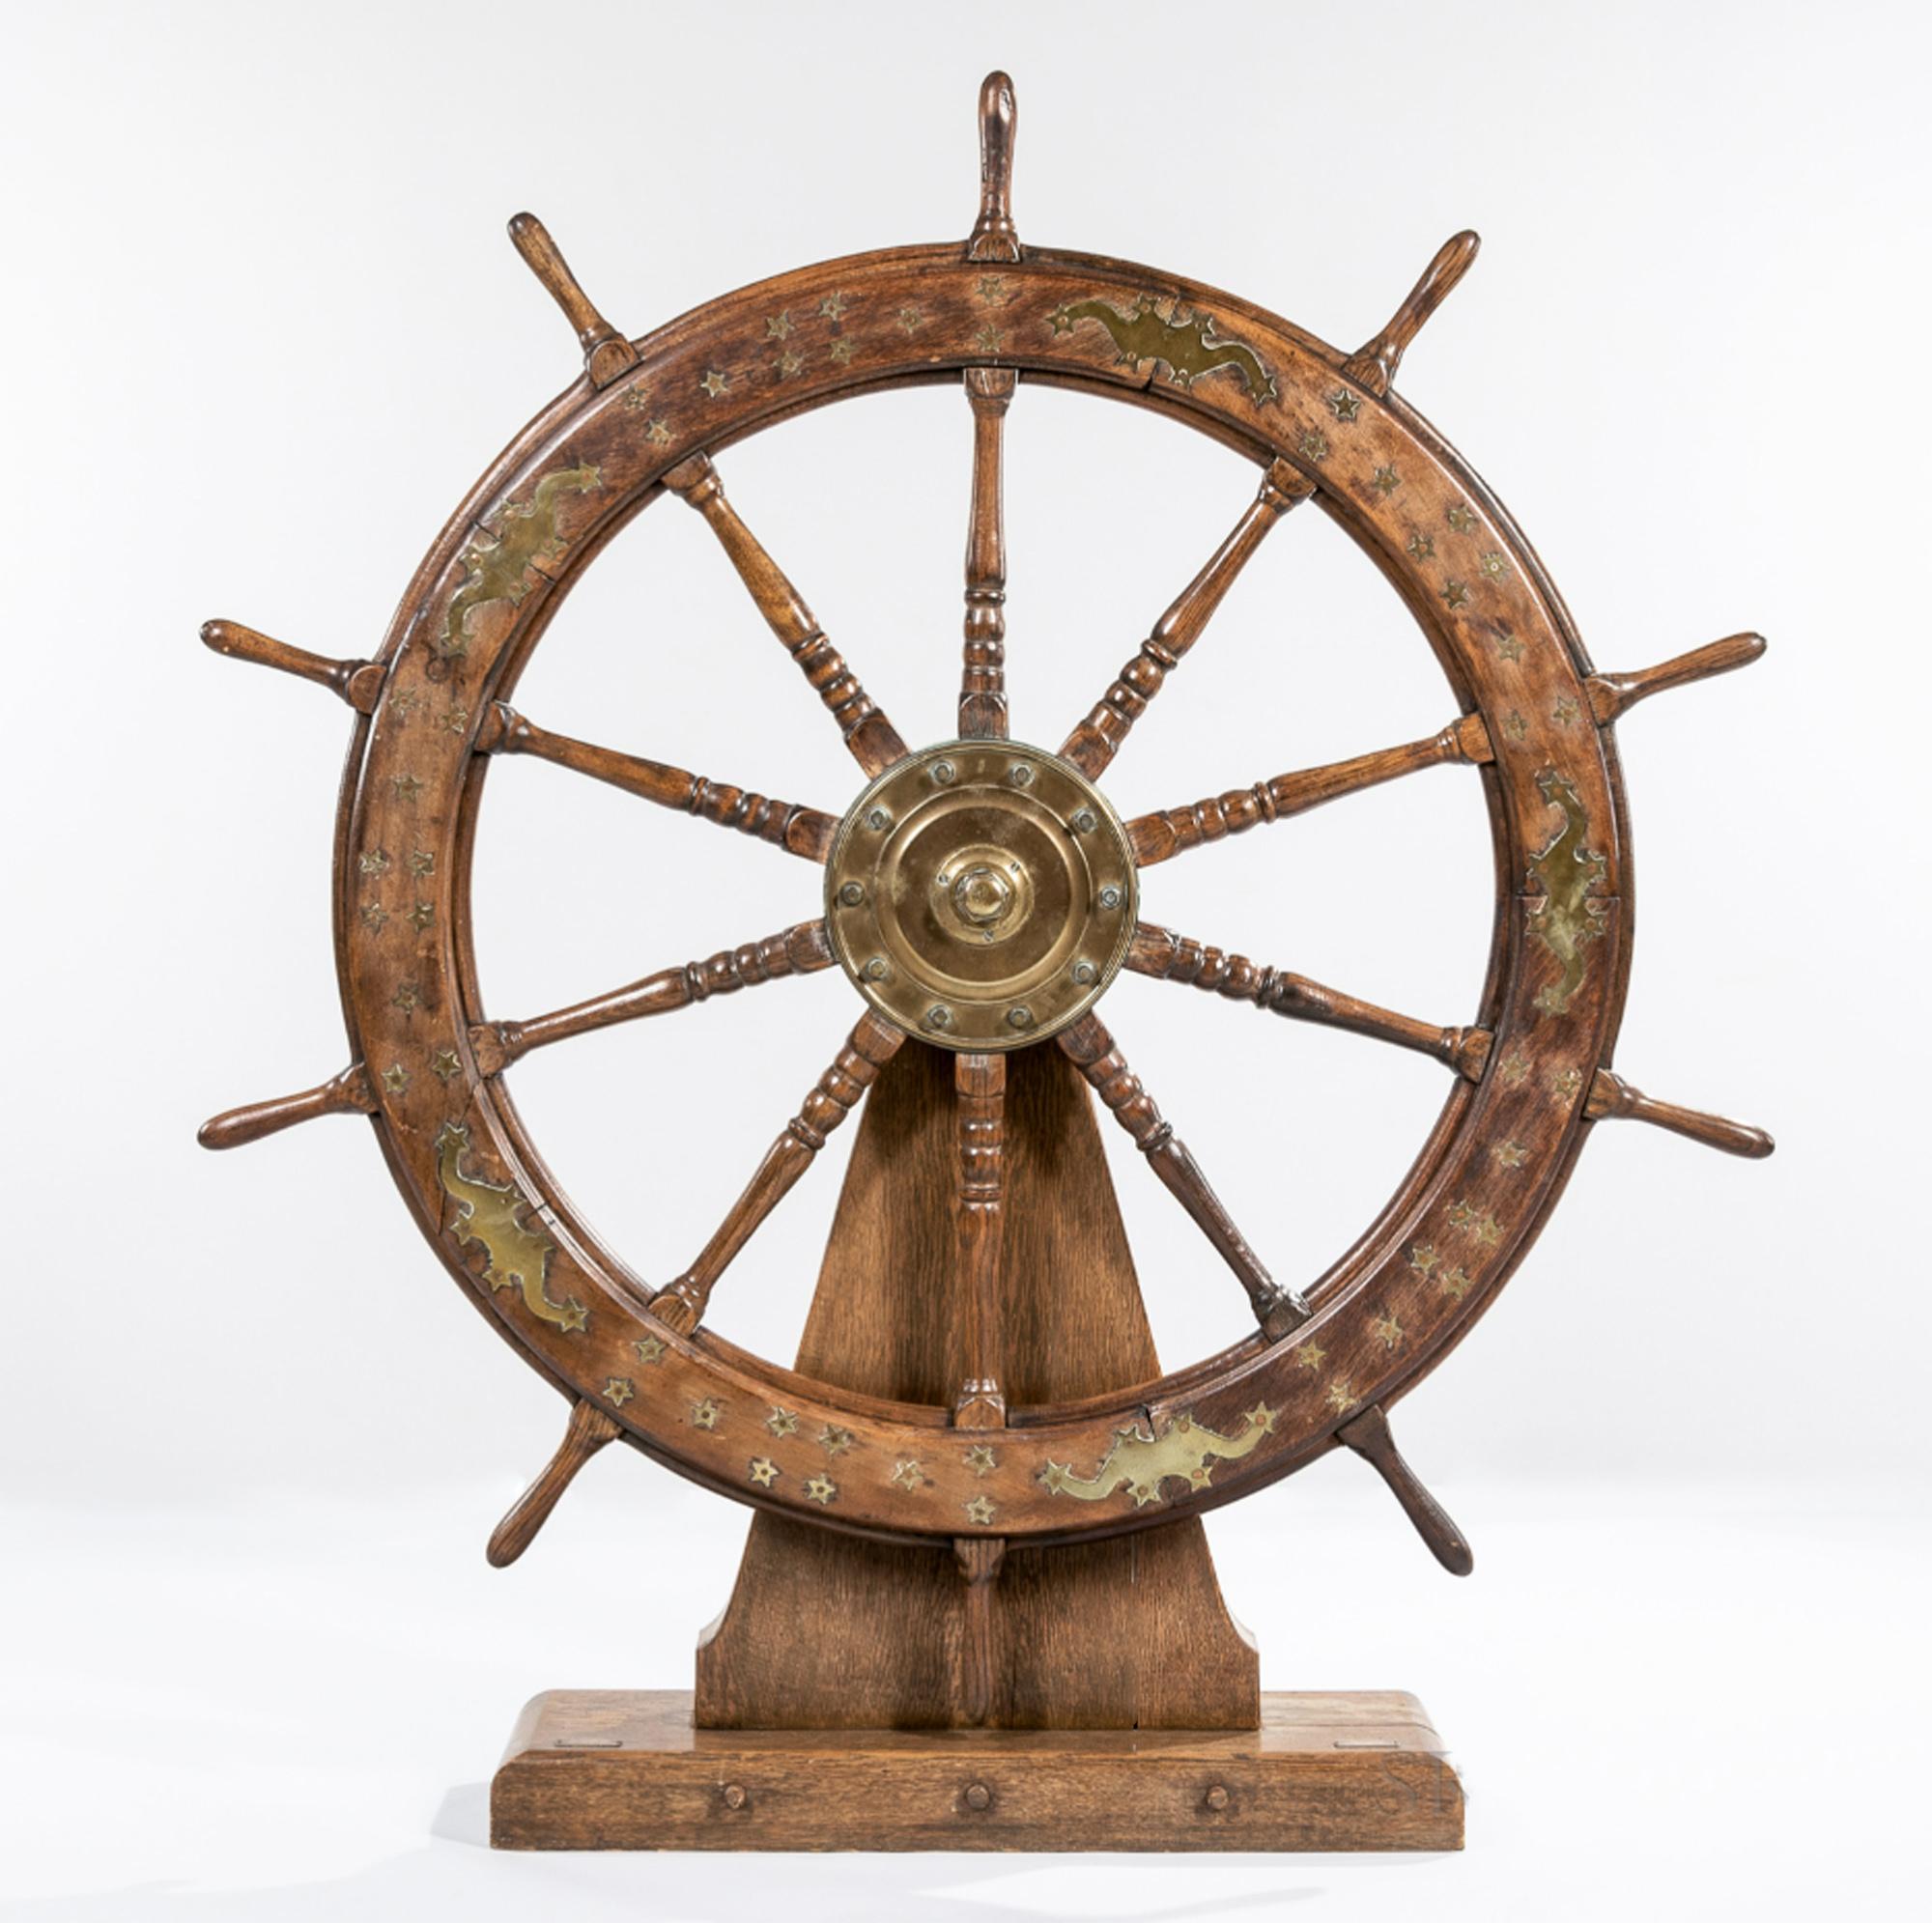 Ship's Helm with brass inlay of shooting stars and stars,
Early 20th Century

The large decorative ship's wheel or helm are beautifully inlaid on both sides with brass decoration consisting of star groupings and depictions of shooting stars. The